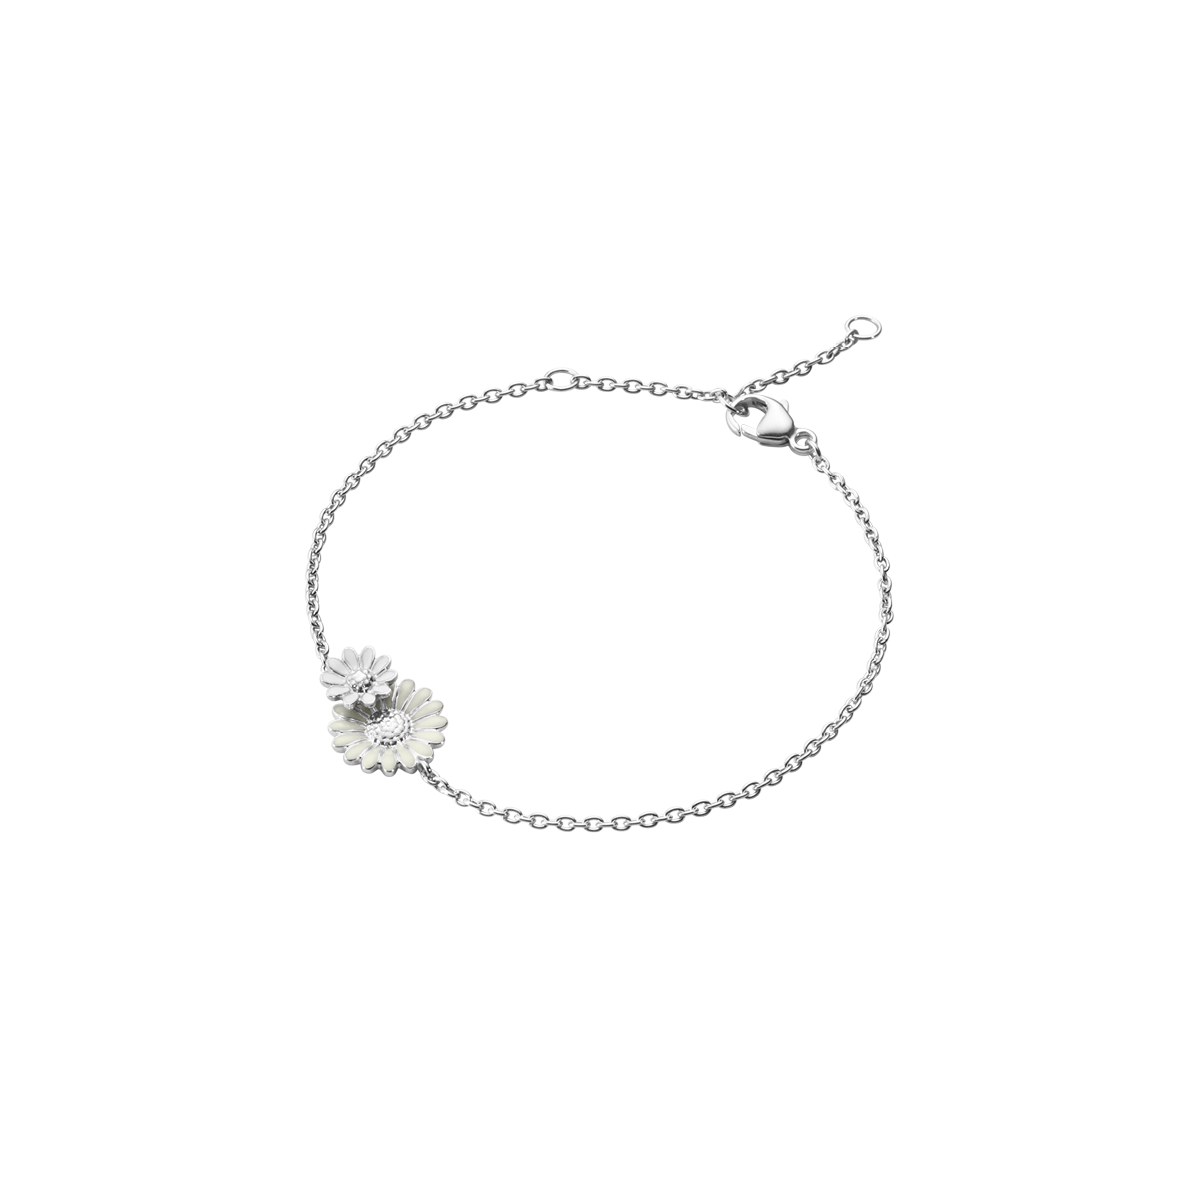 DAISY Bracelet in rhodium-plated sterling silver and white enamel